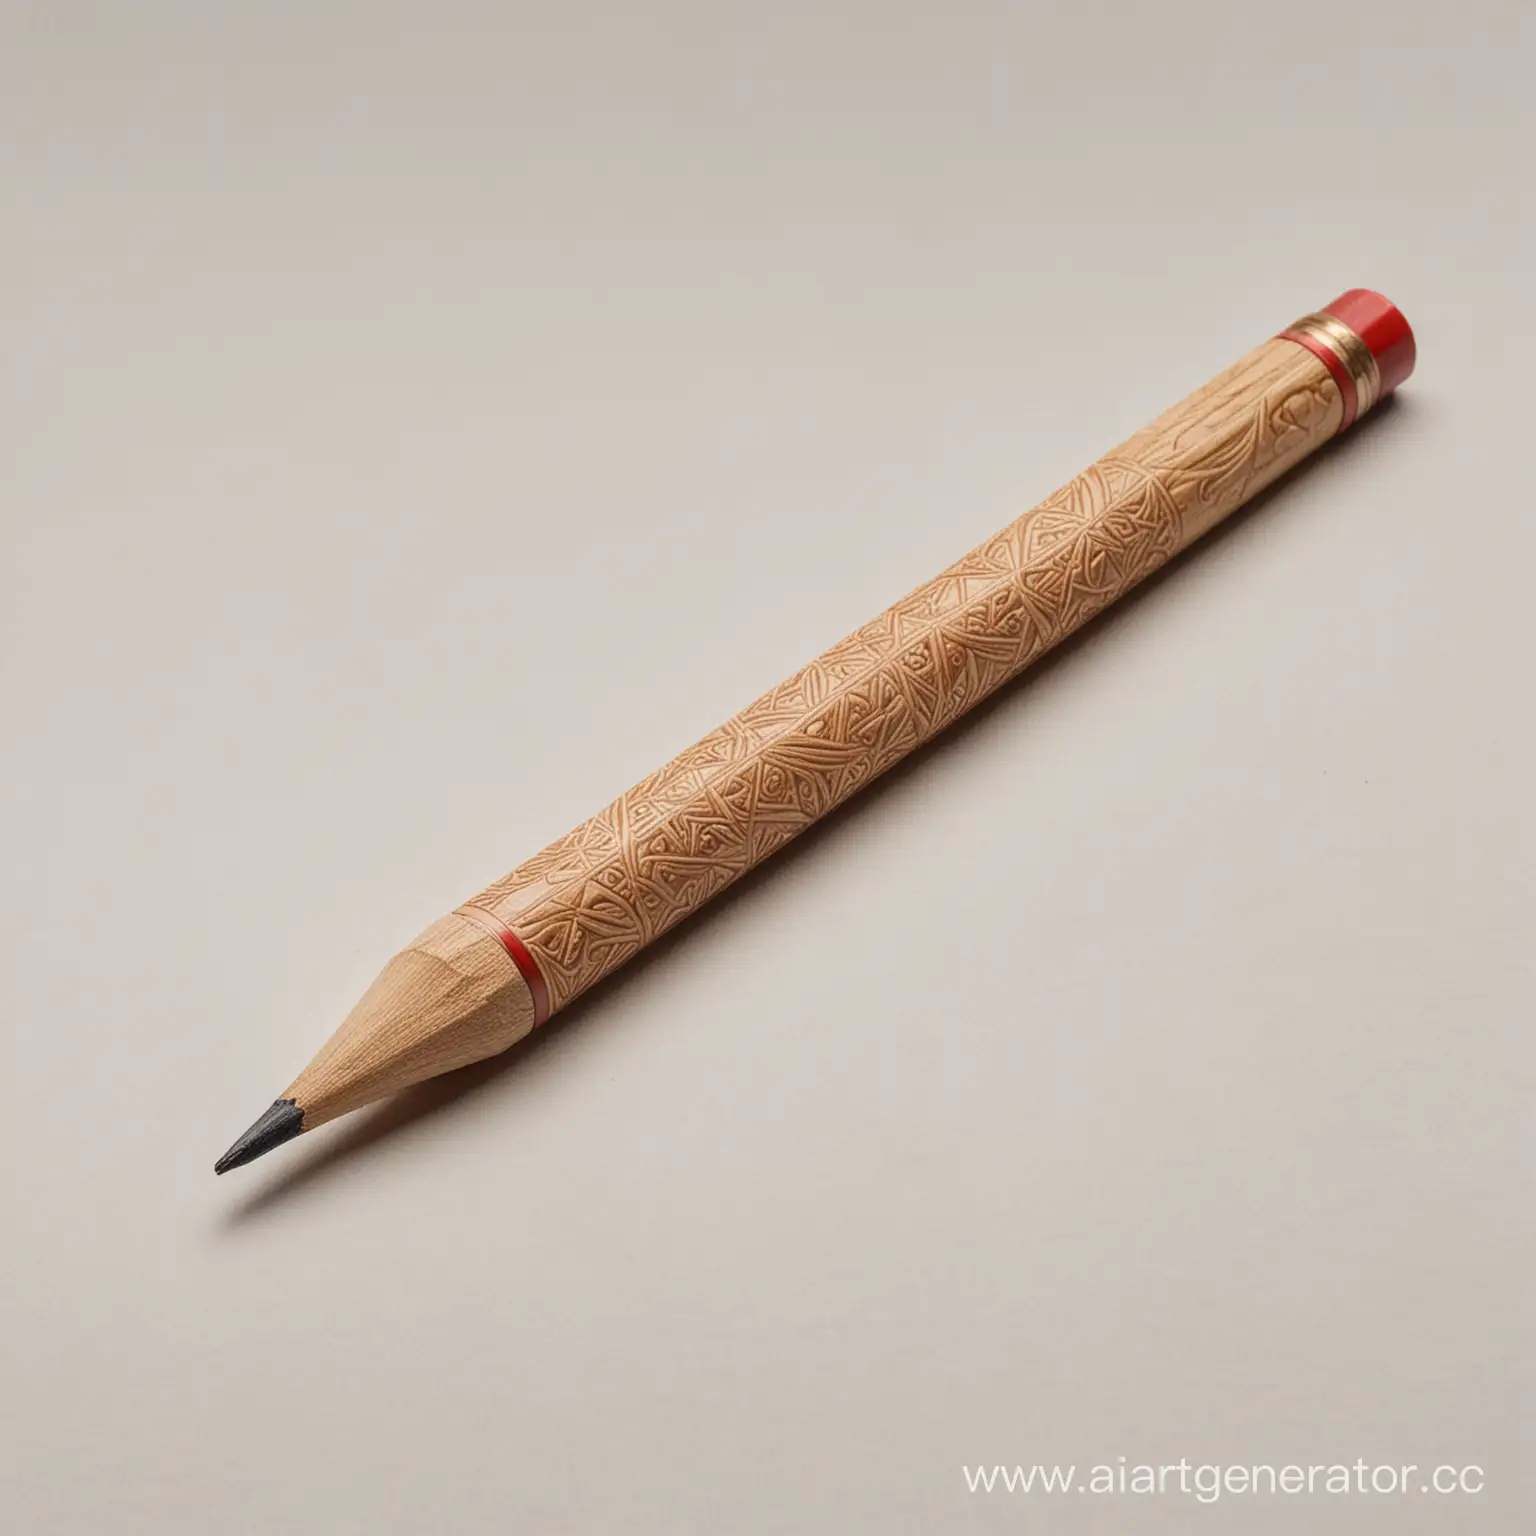 Slavic-Wooden-Pencil-on-Clean-White-Surface